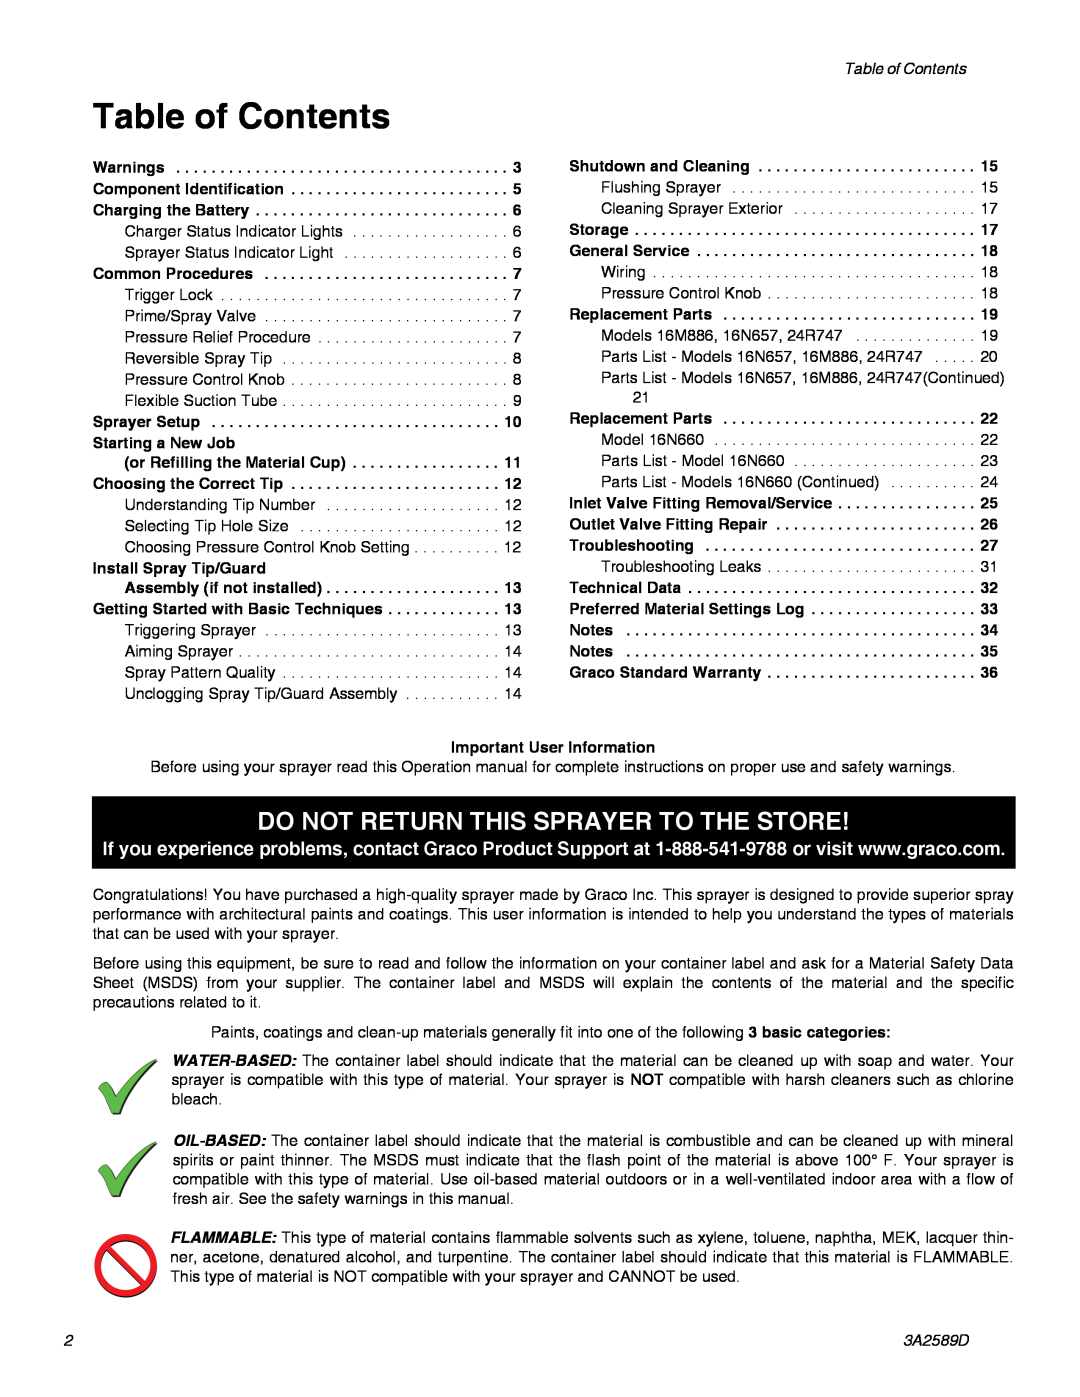 Graco 3A2589D important safety instructions Table of Contents, Do Not Return This Sprayer To The Store 